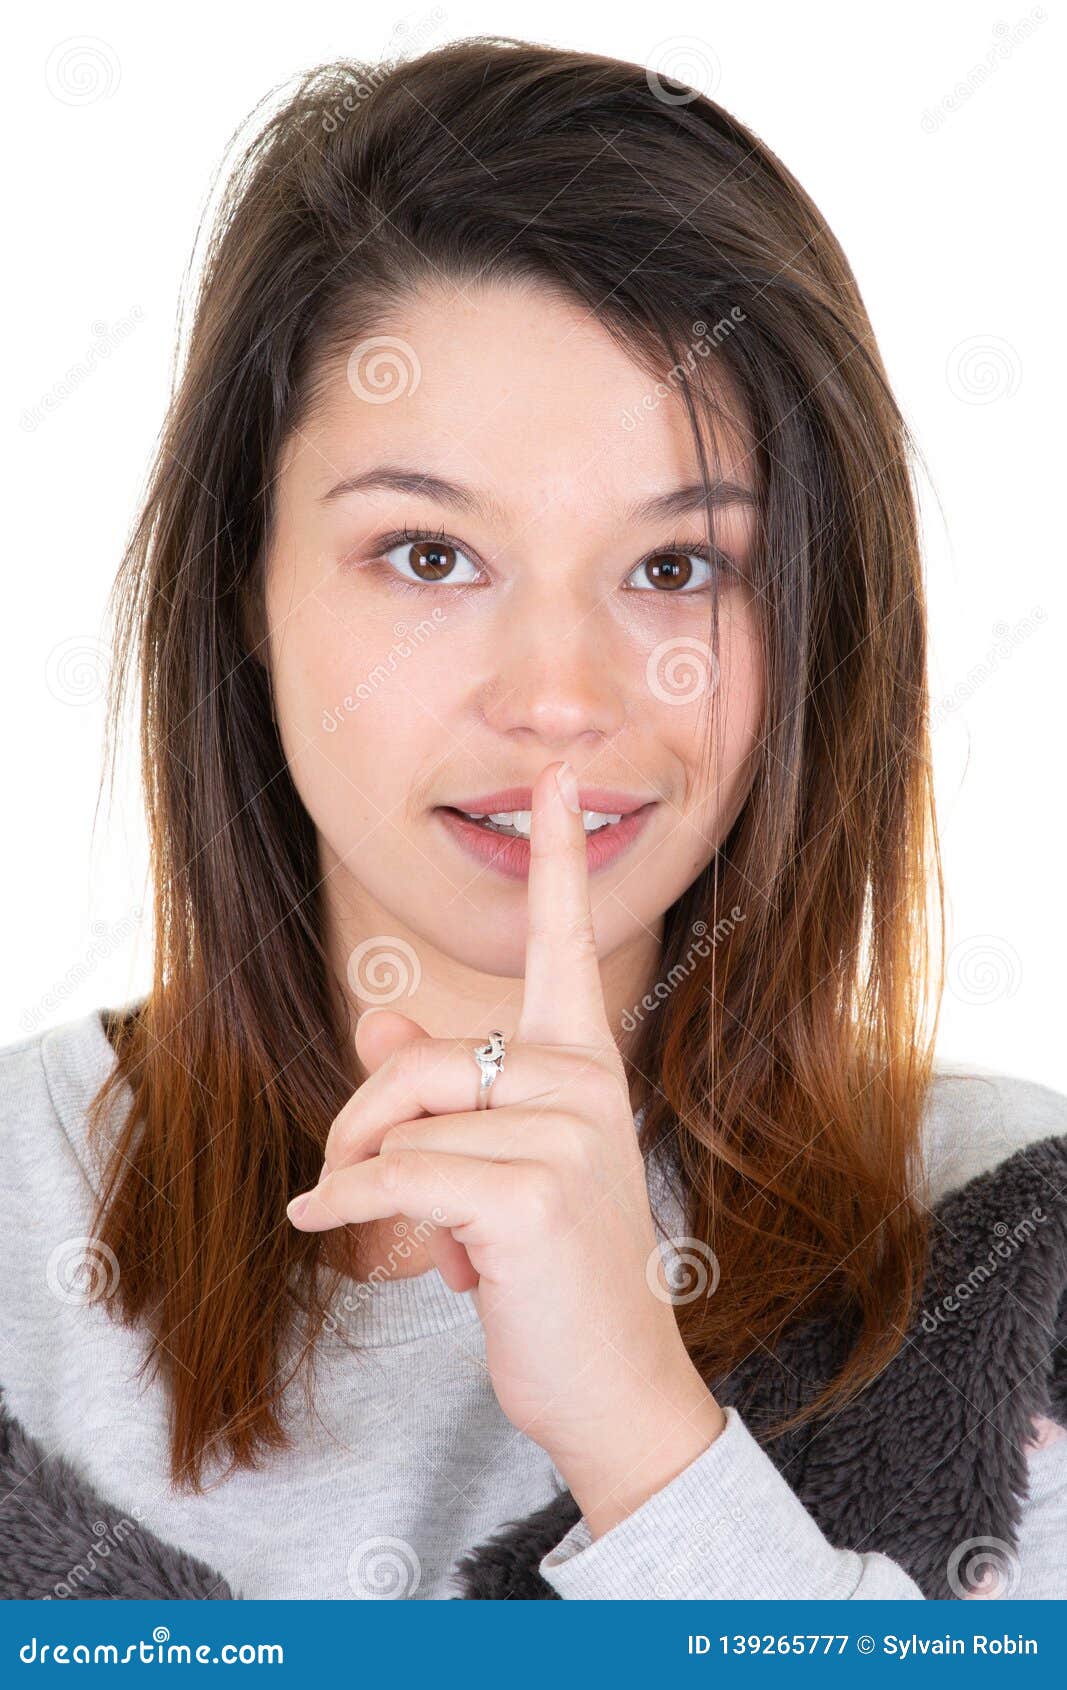 Woman Young Asking For Silence Or Secrecy With Finger On Lips Shh Hand ...